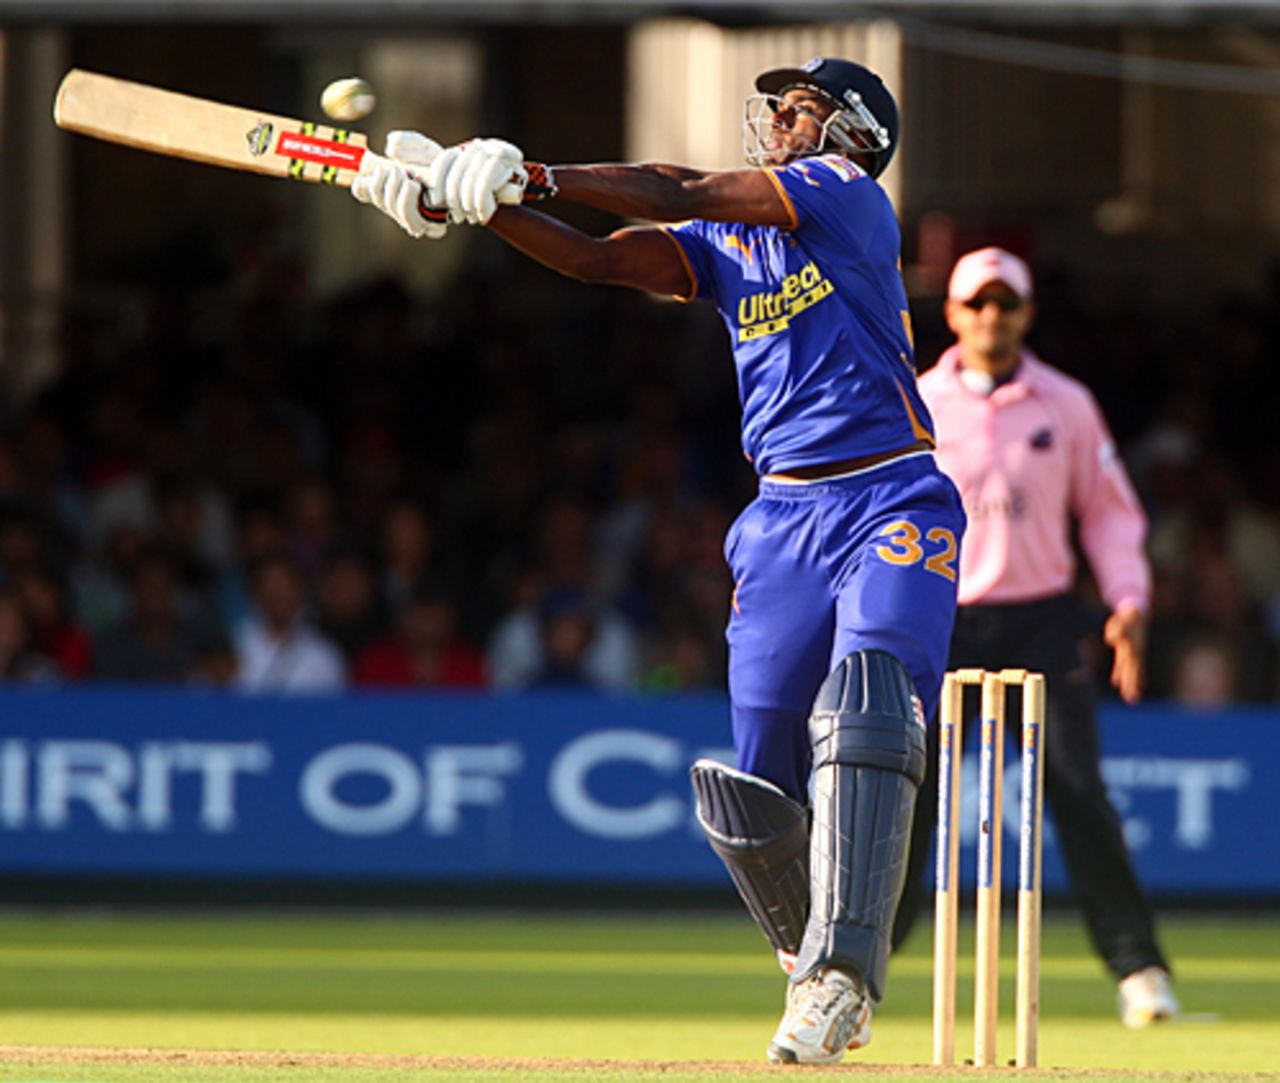 Dimitri Mascarenhas tries for maximum, Middlesex v Rajasthan Royals, British Asian Cup, Lord's, July 6, 2009